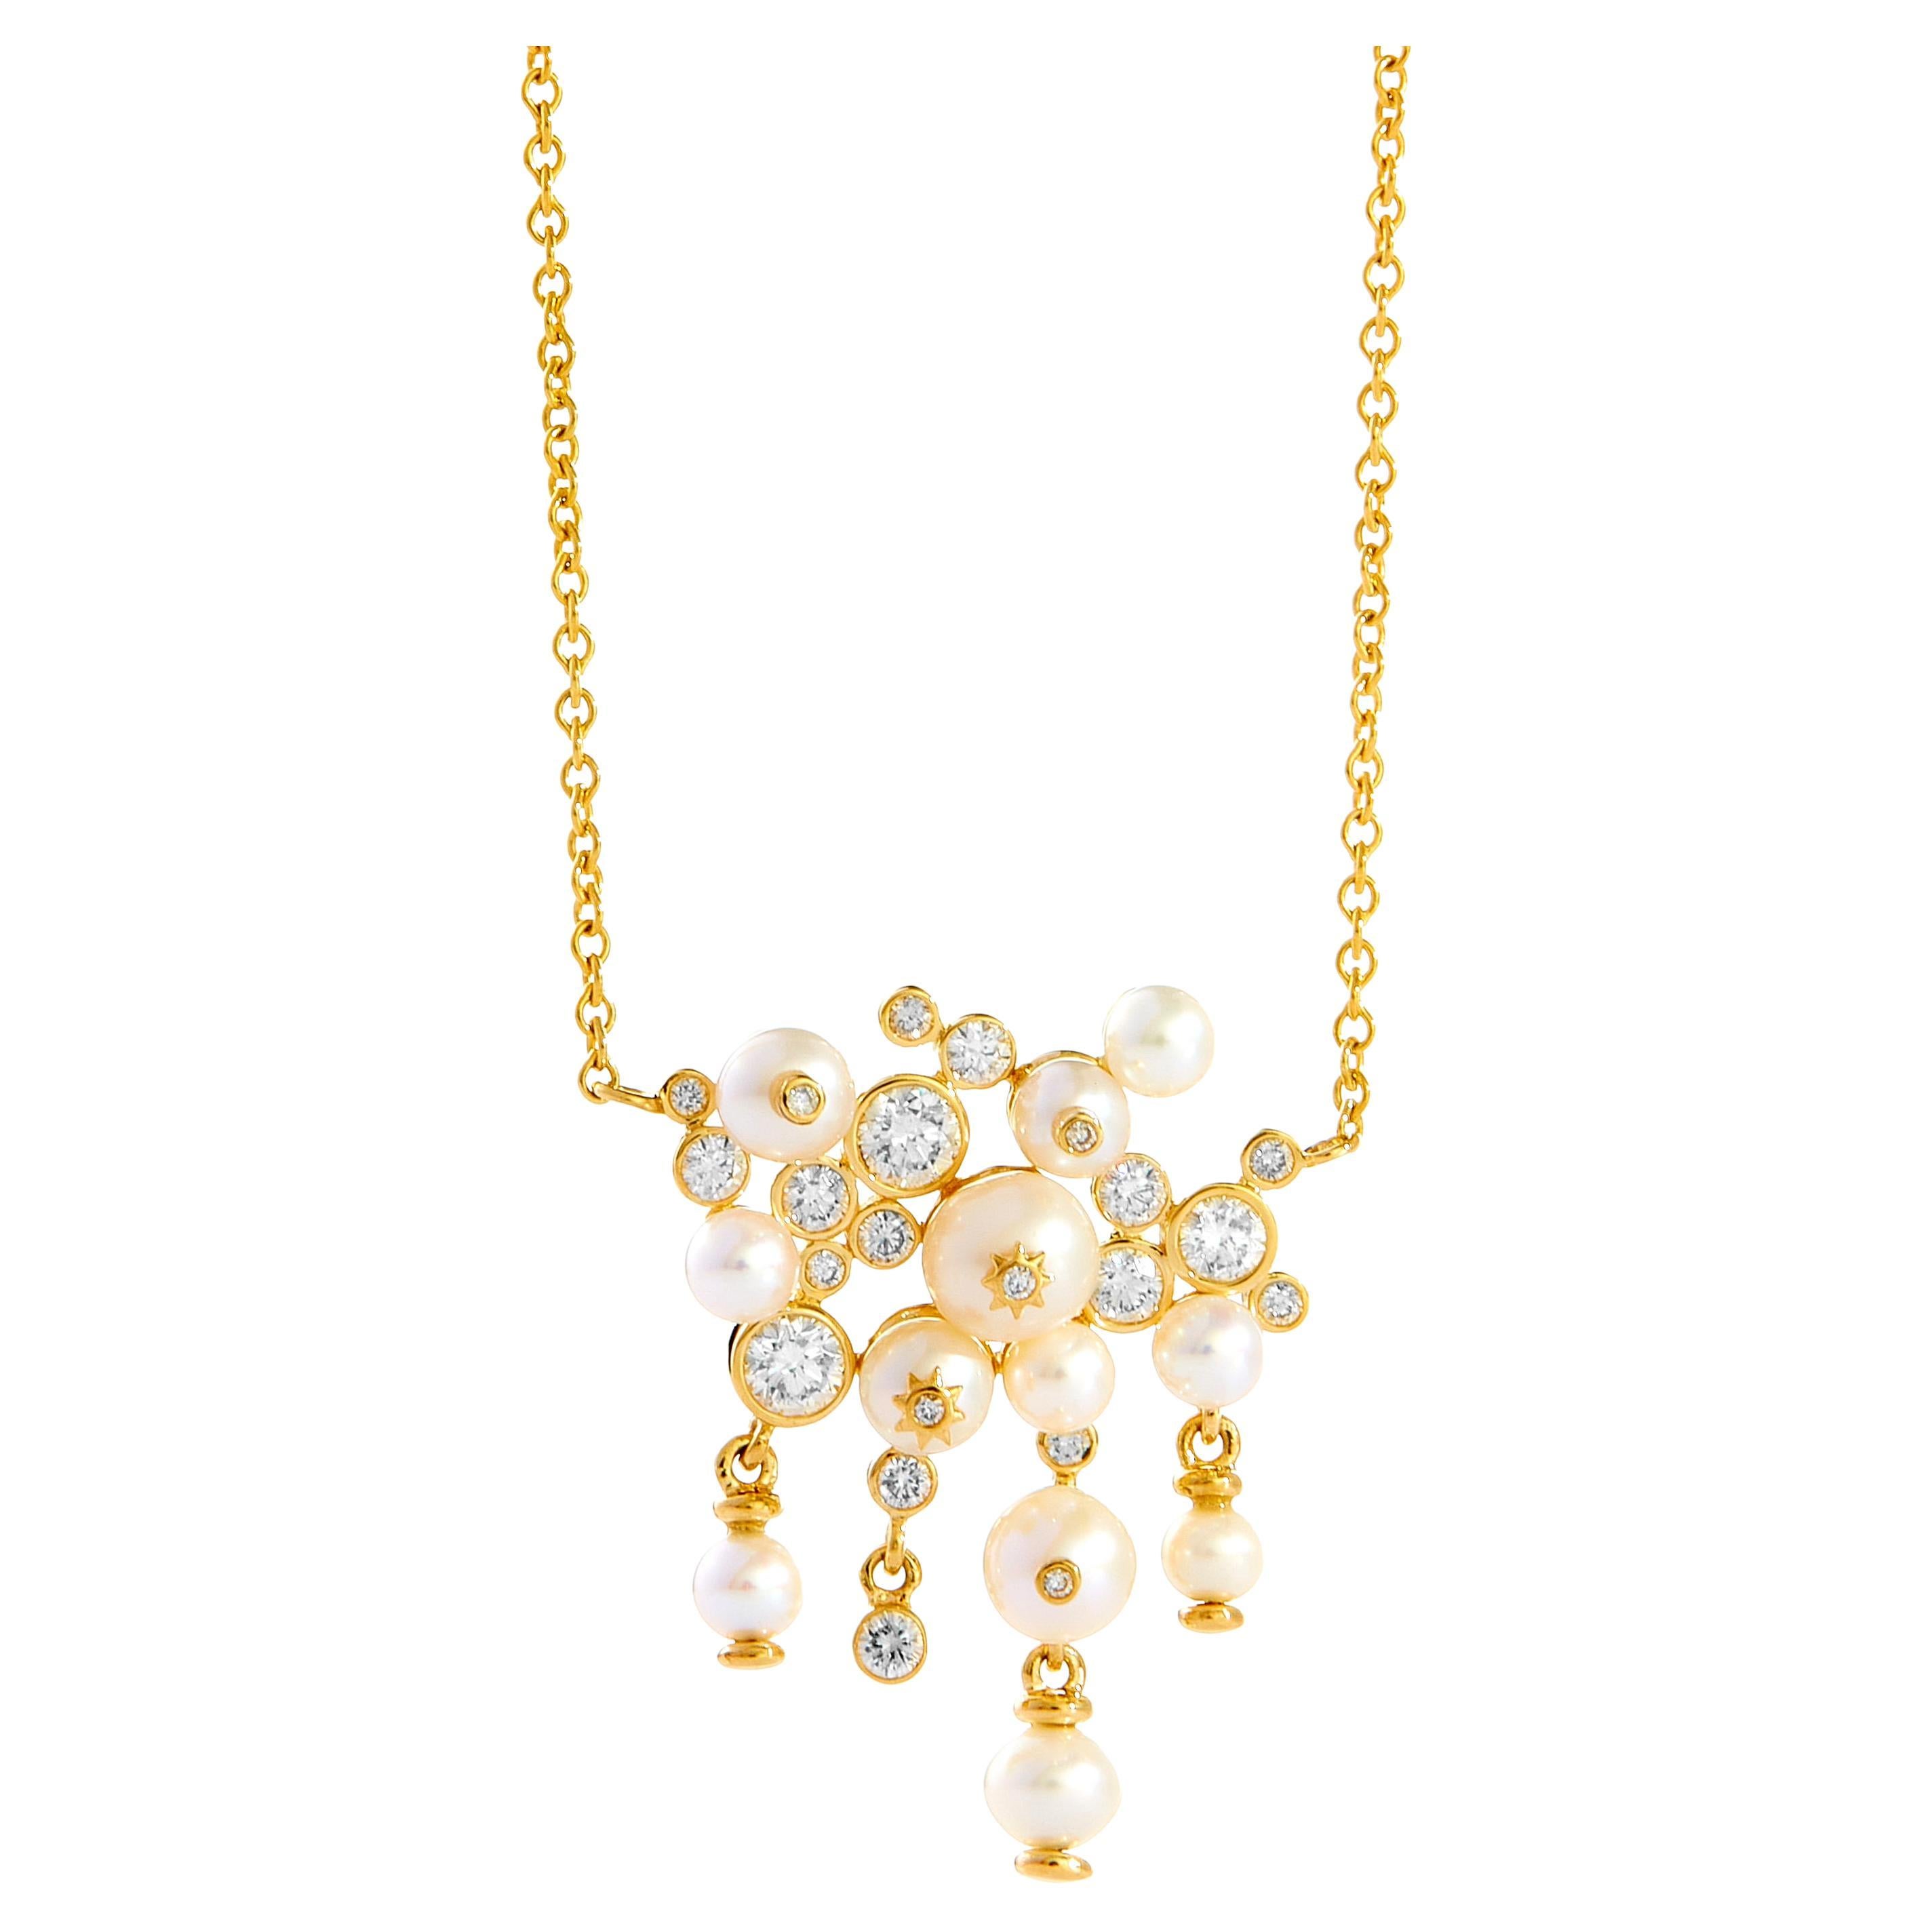 Syna Yellow Gold Cosmic Cluster Necklace with Pearls and Diamonds